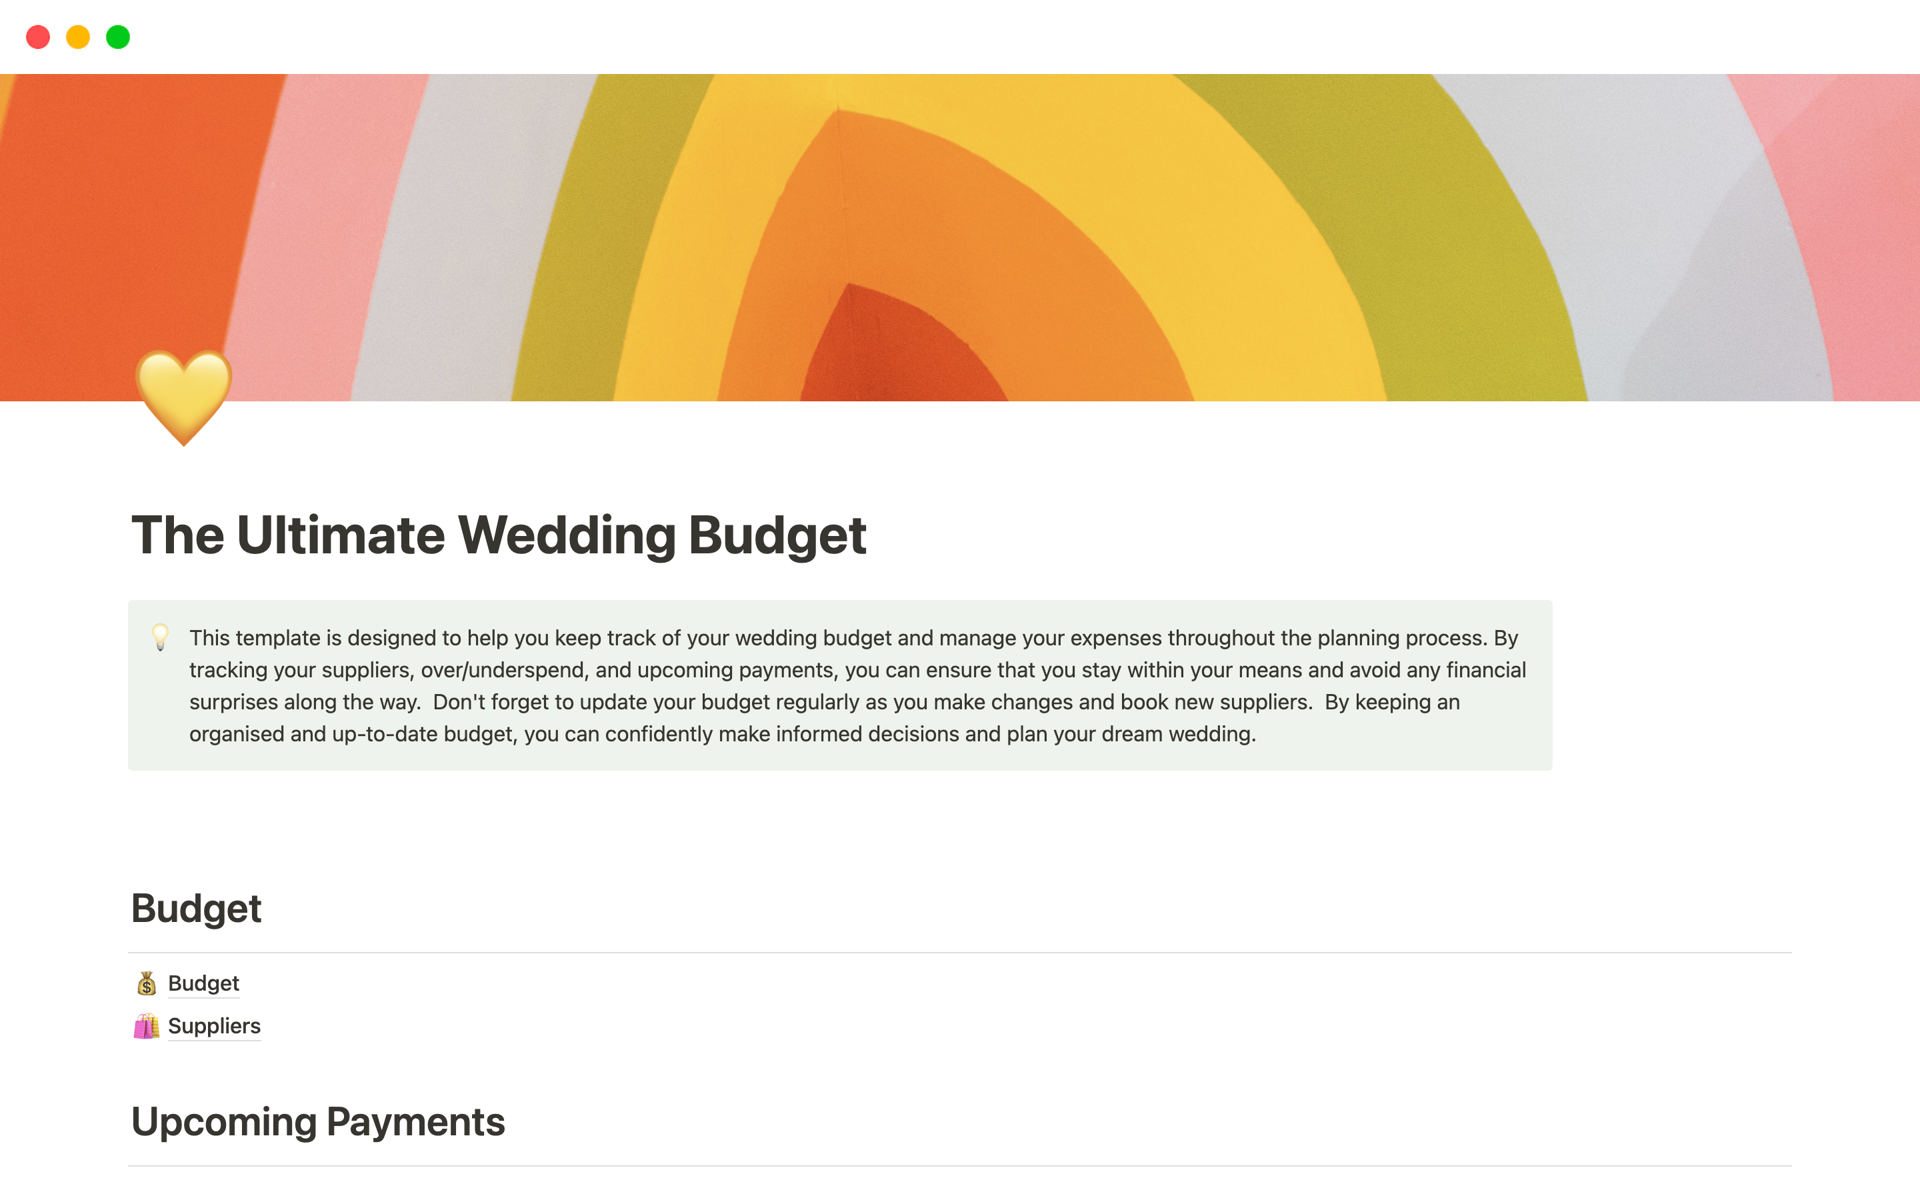 This Notion template includes a super detailed budget plus a supplier management section.